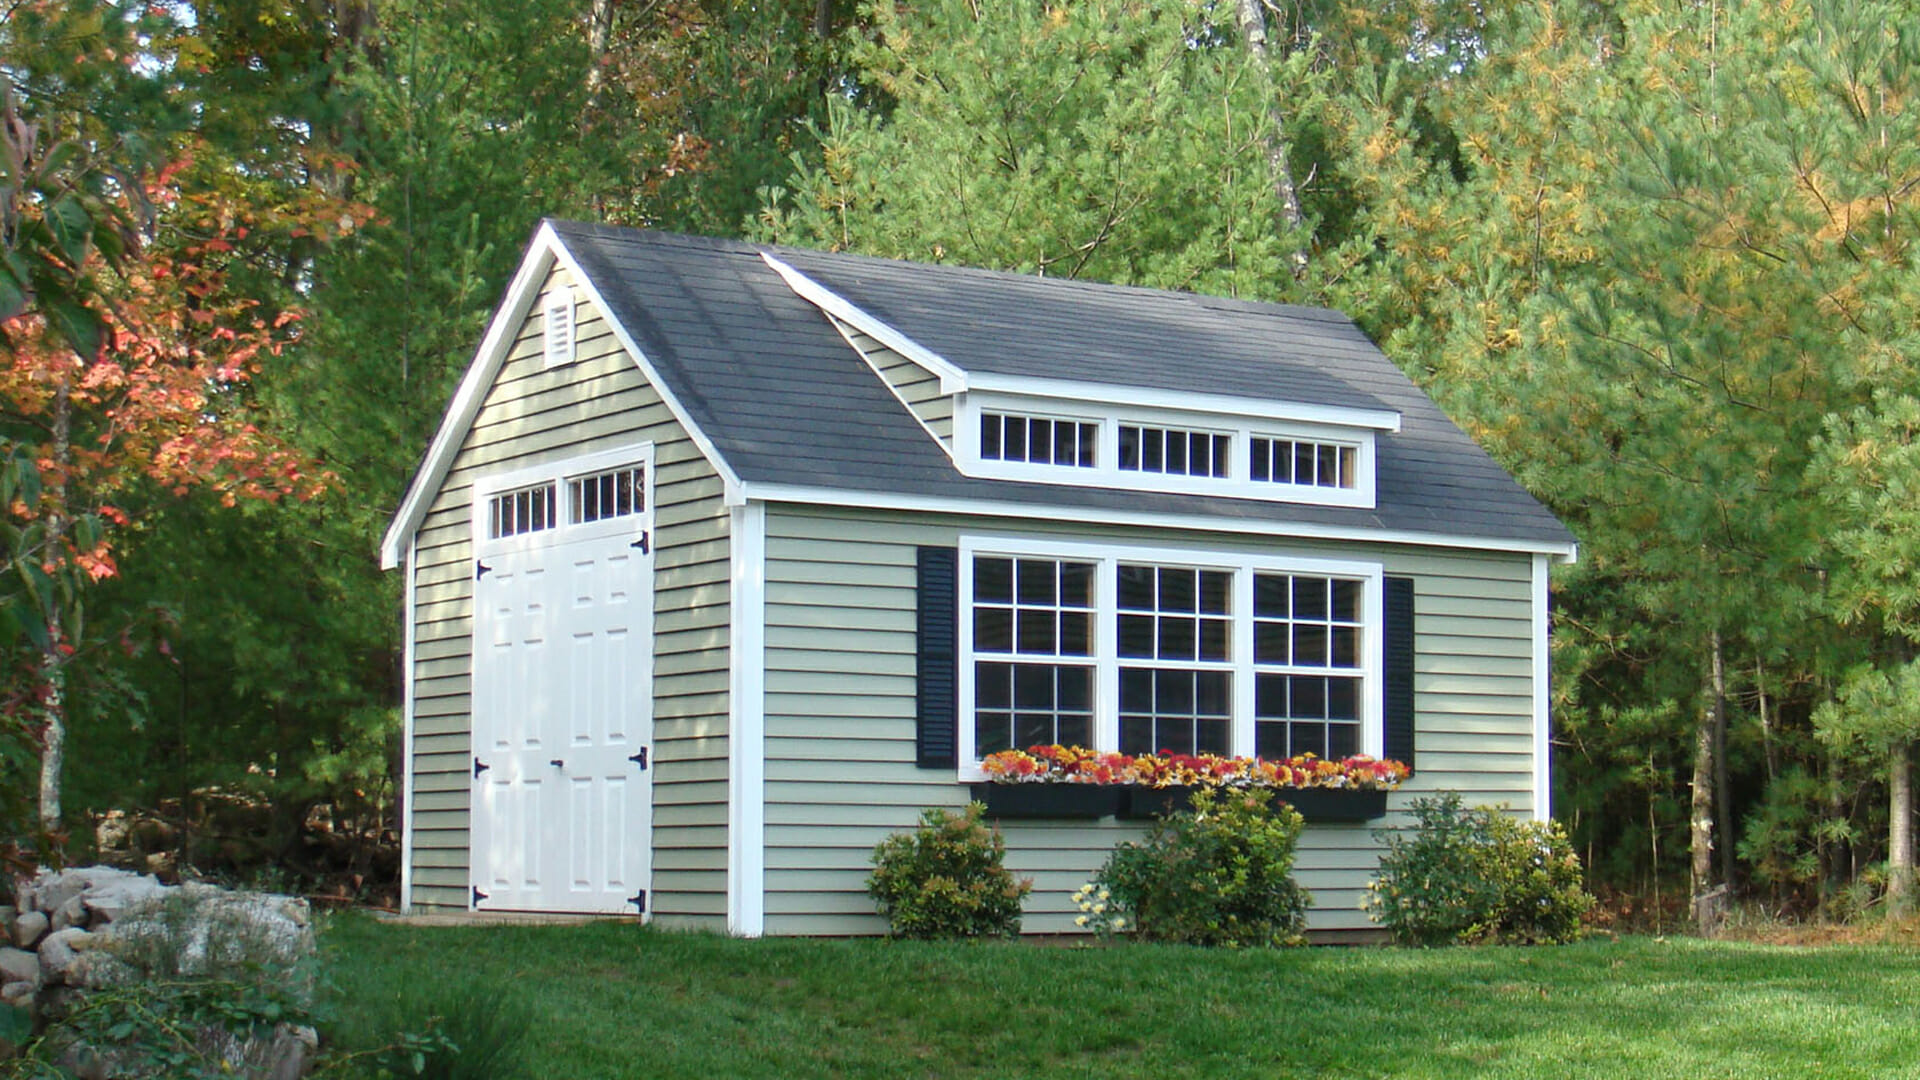  Houses With Shed Roof Dormers. on carriage house plans cost to build